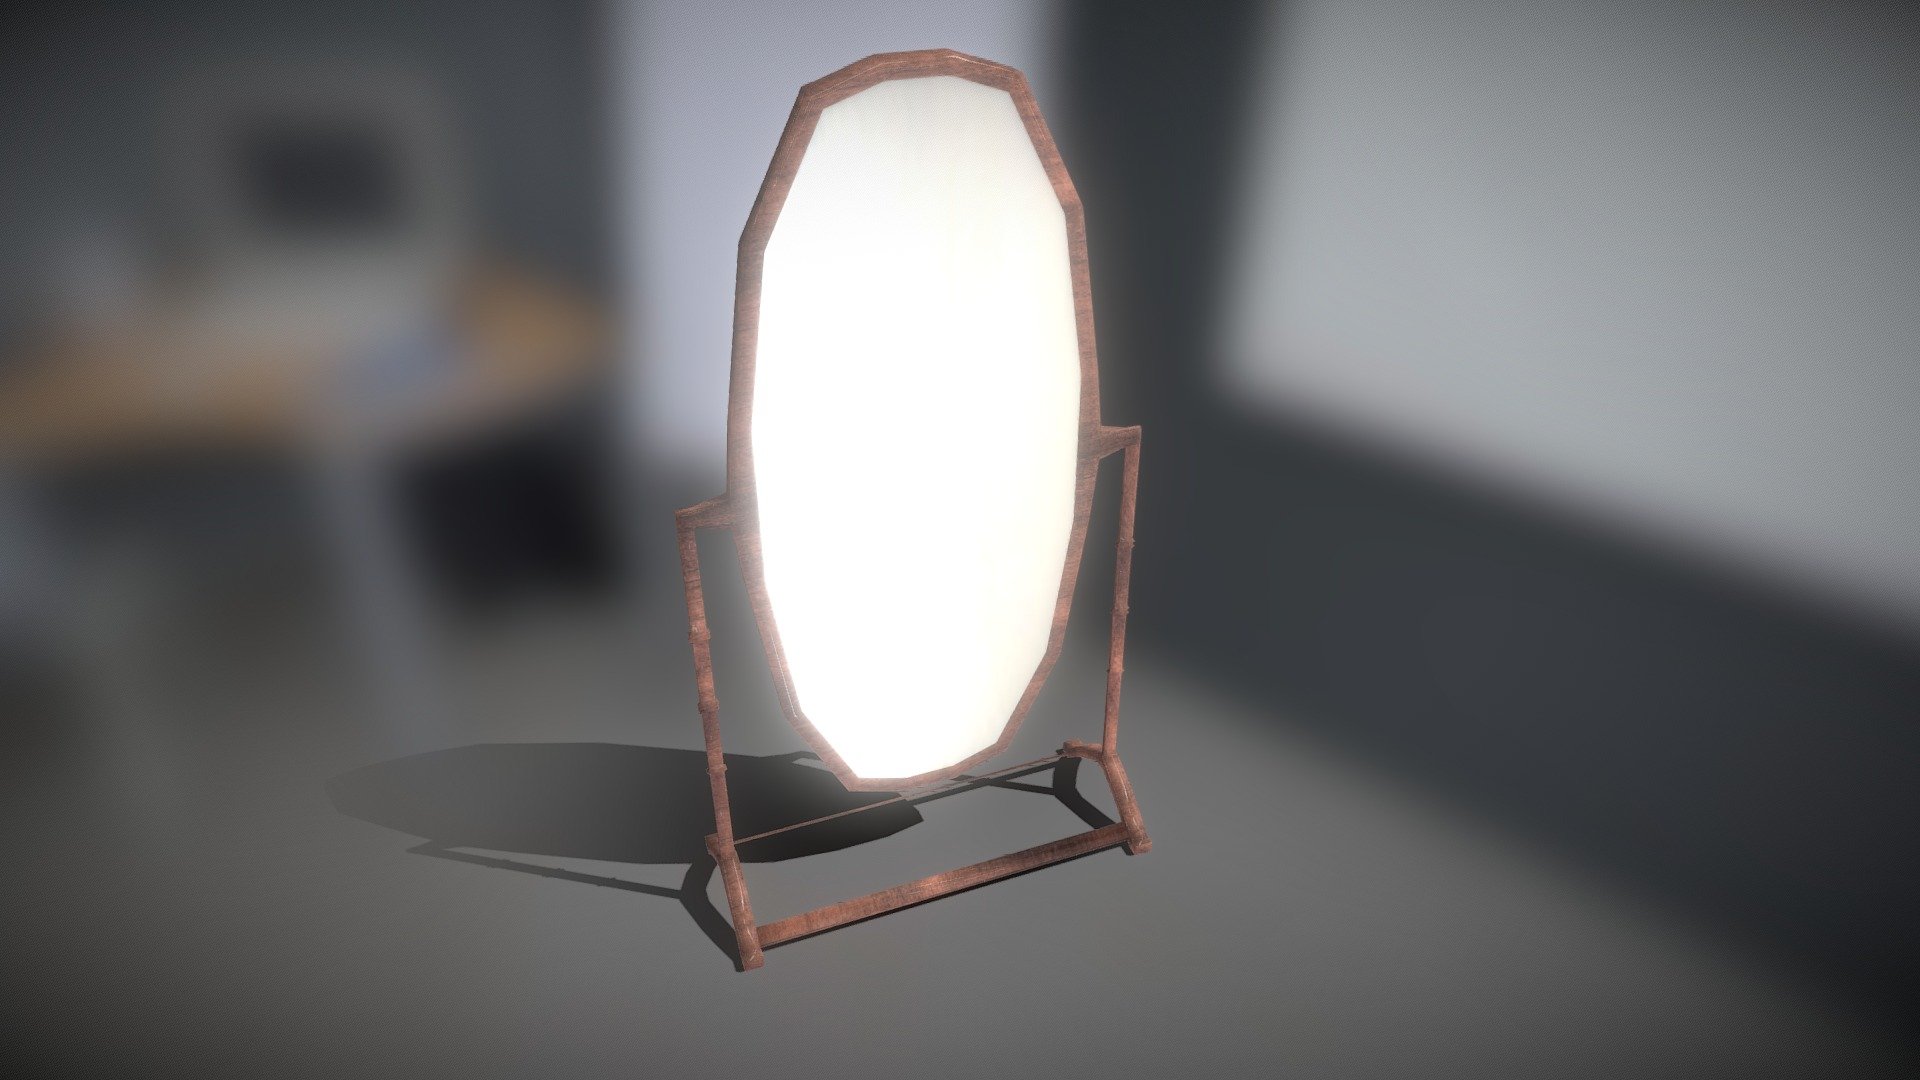 Standing Mirror Low Poly Buy Royalty Free 3d Model By Robfitzy [5b69bbe] Sketchfab Store